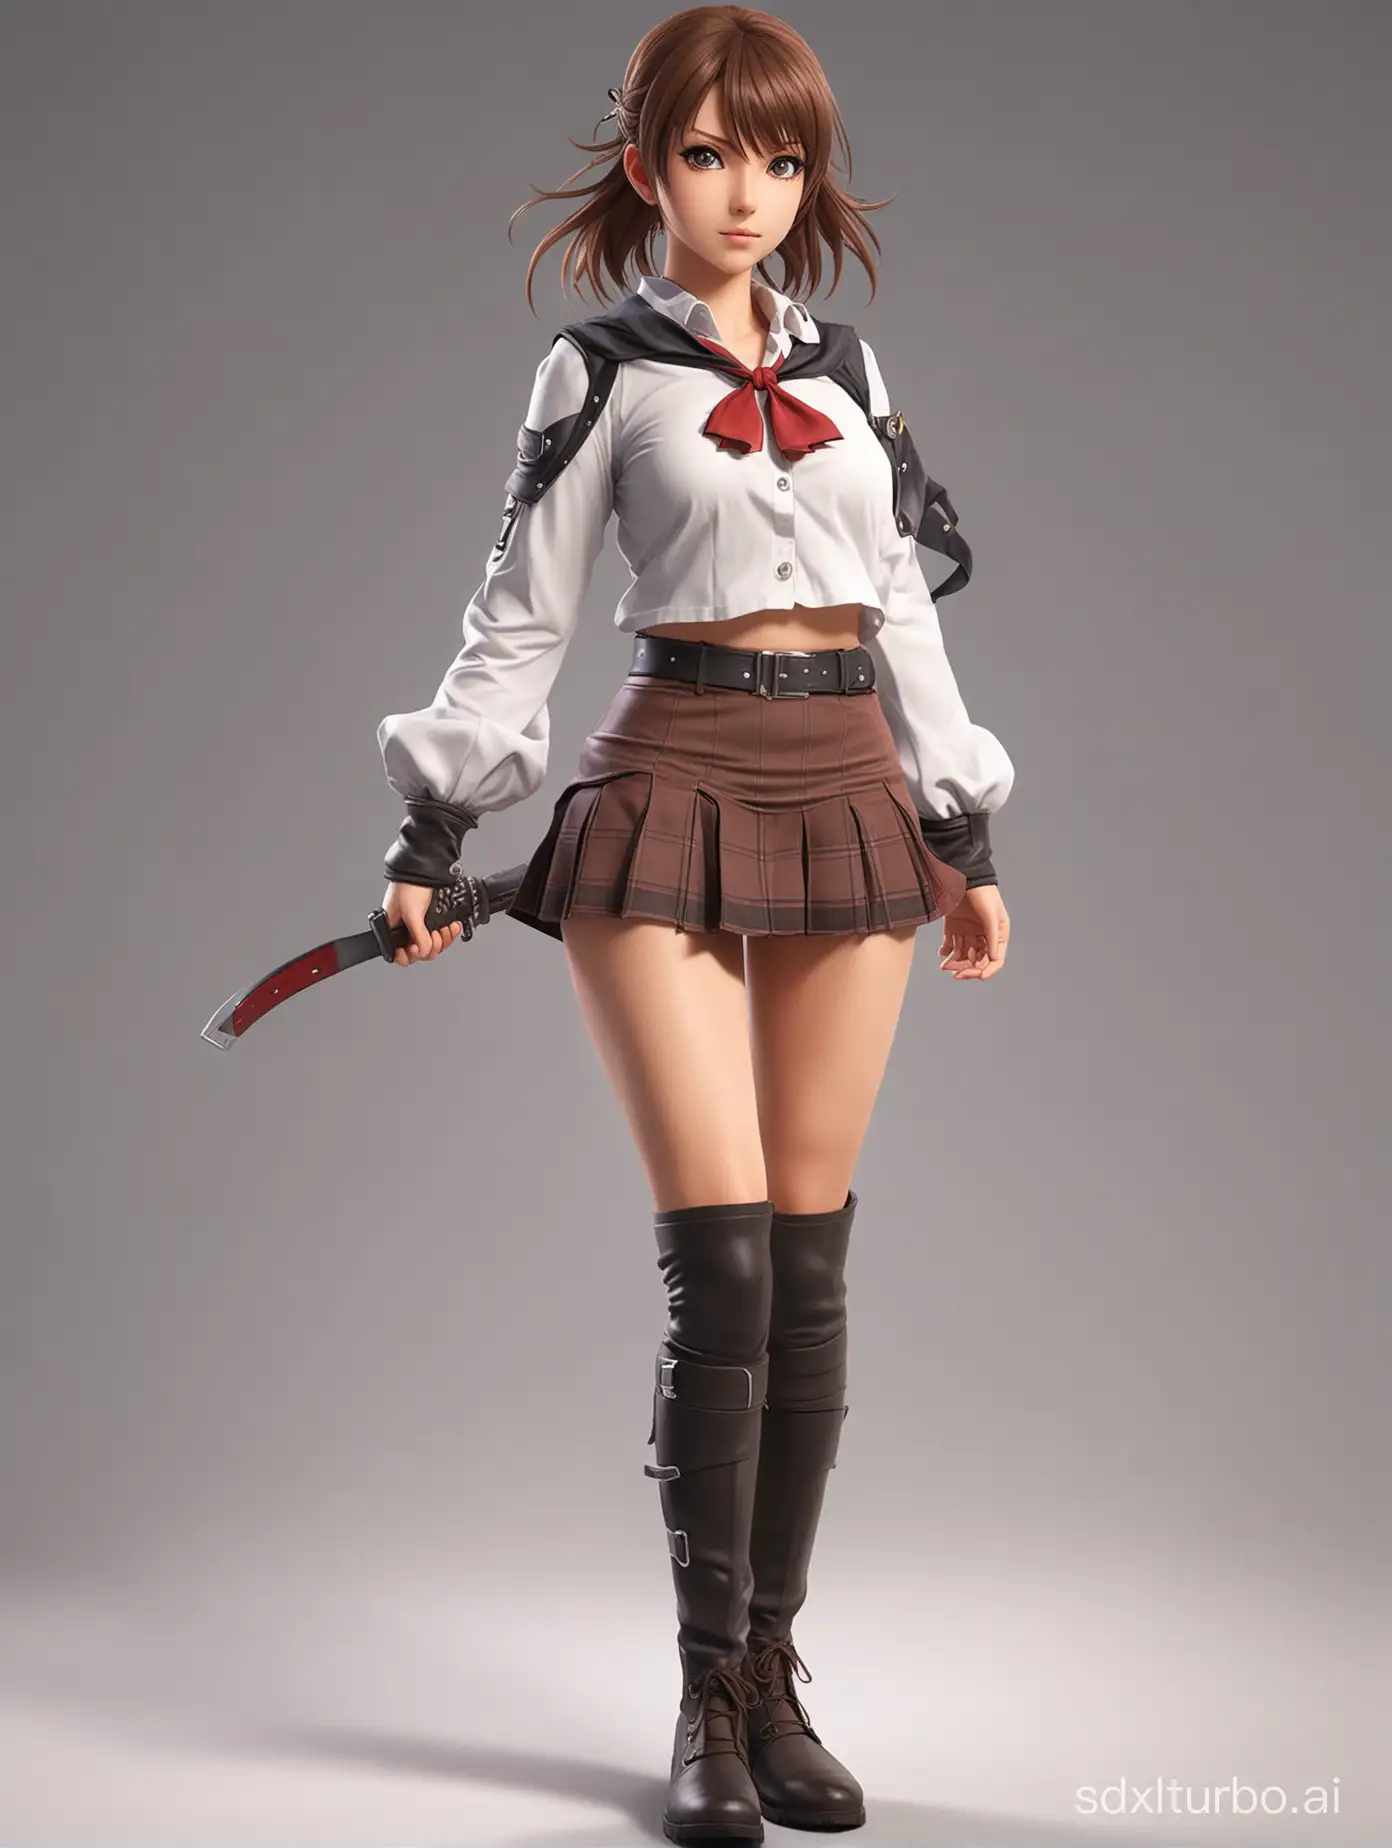 Fierce Determination: Anime Girl Ready for Battle" - Showcasing a rendered anime girl in skirt and boots, full body, in the midst of action.